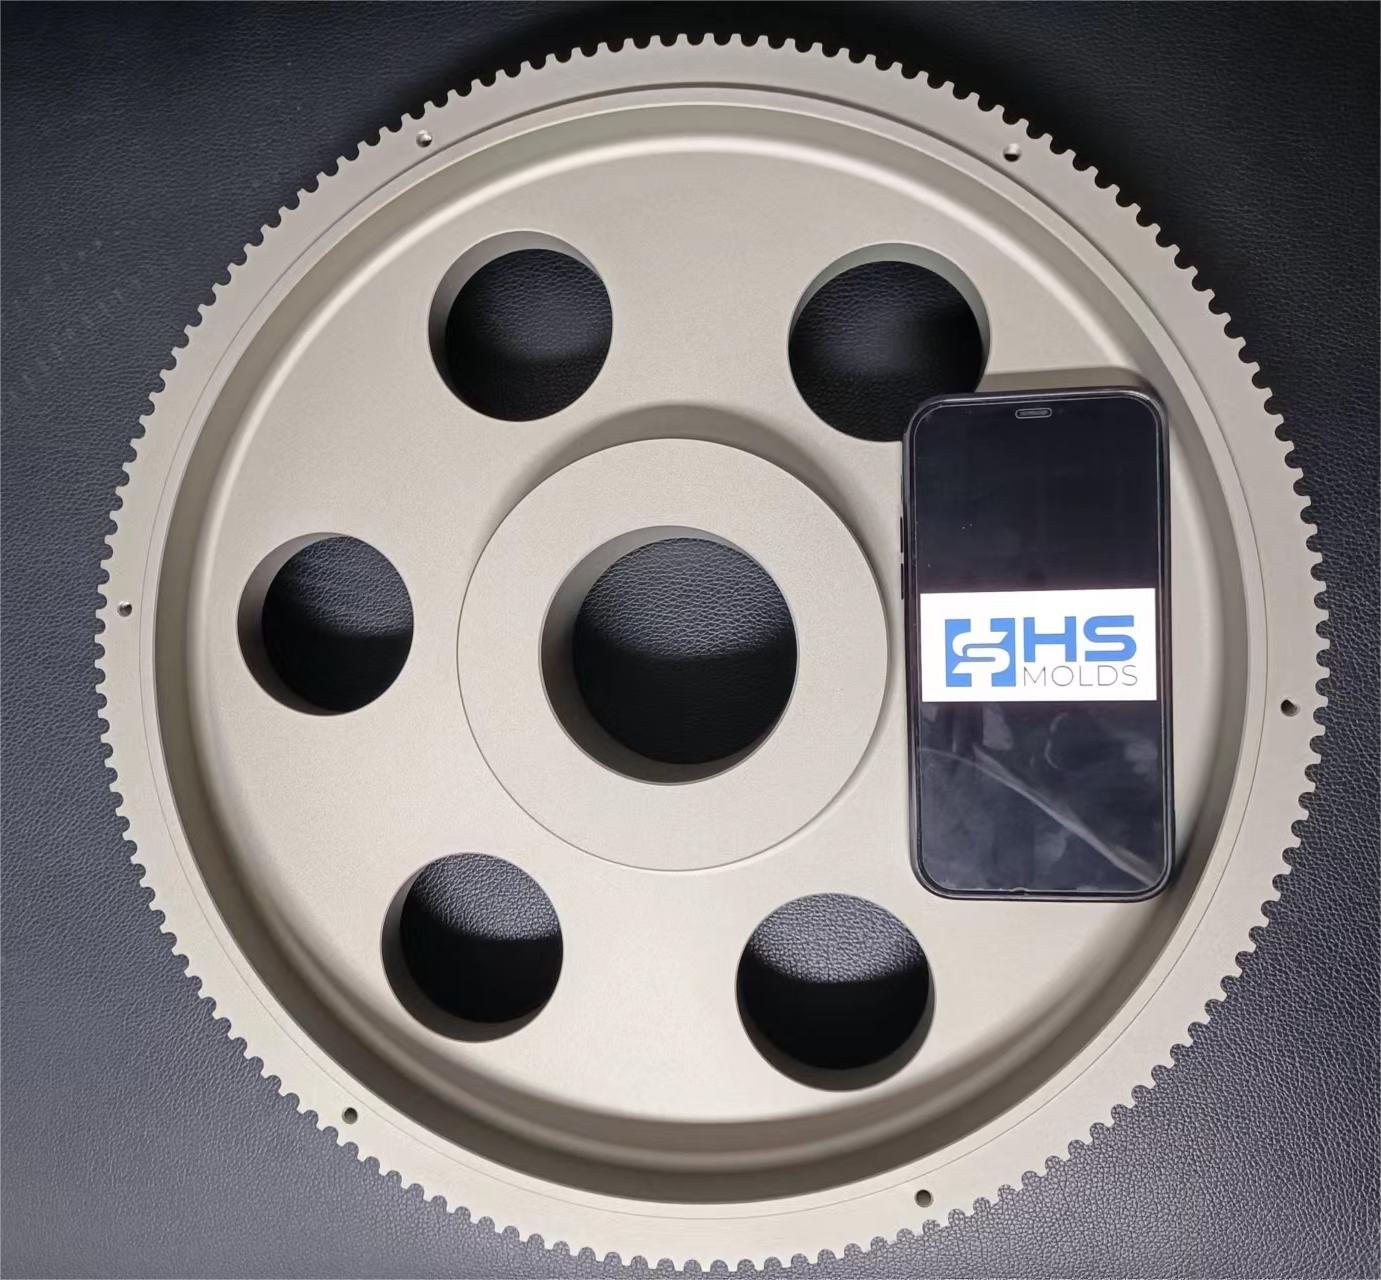 Custom gear manufactured by HS Mold, a leading gear manufacturer based in China, for Expert Machinery Company - a reliable partner in the European machinery industry